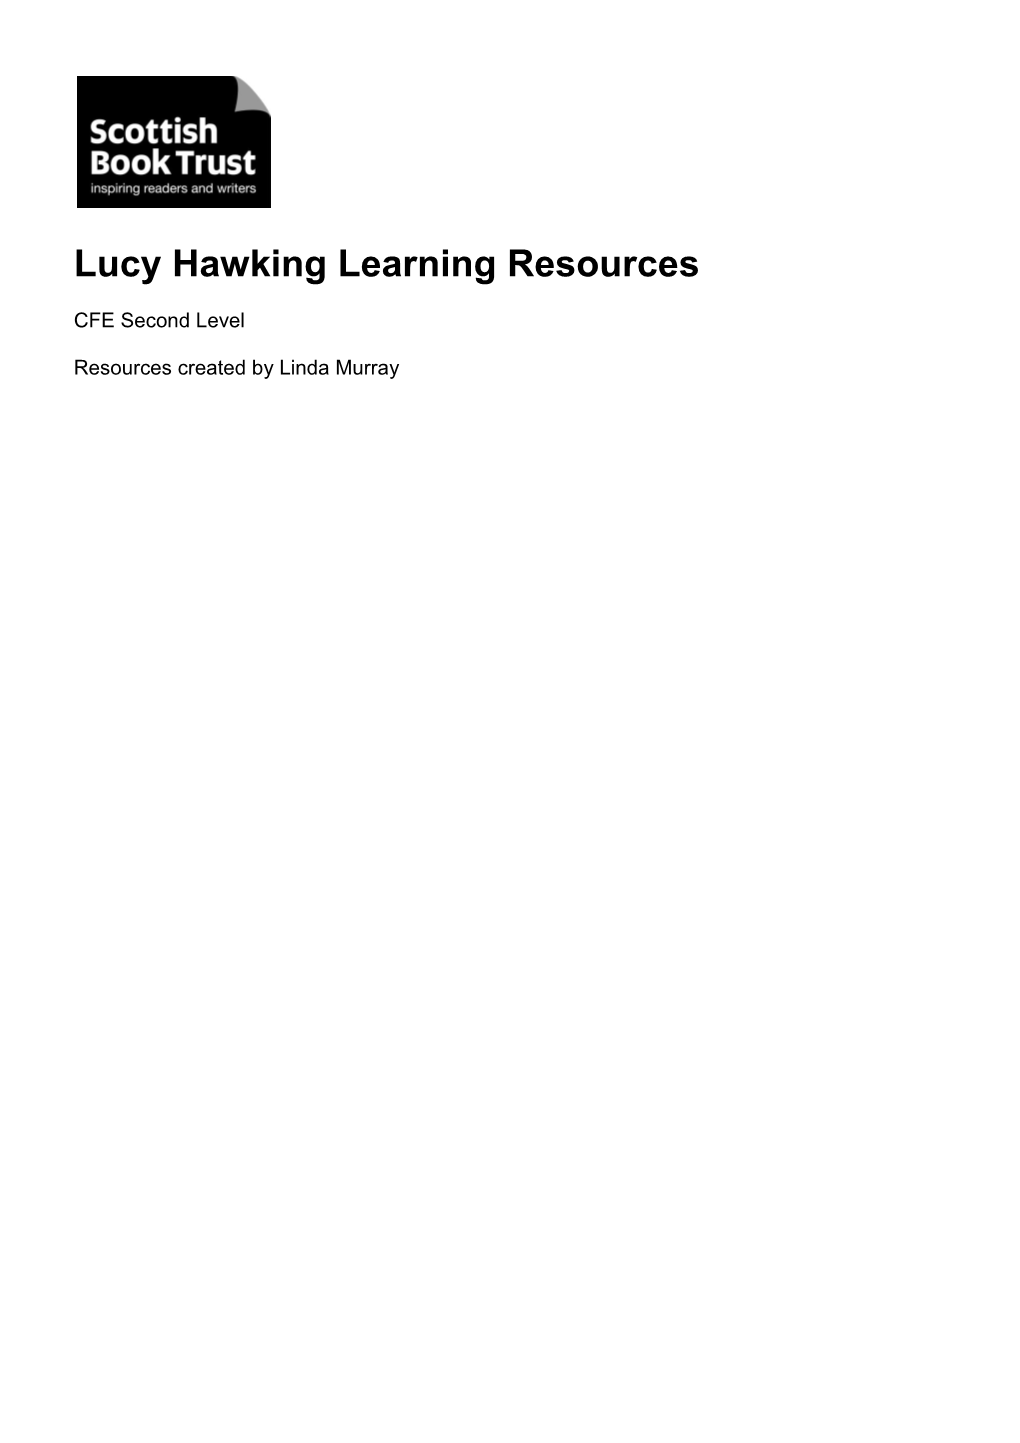 Lucy Hawking Learning Resources